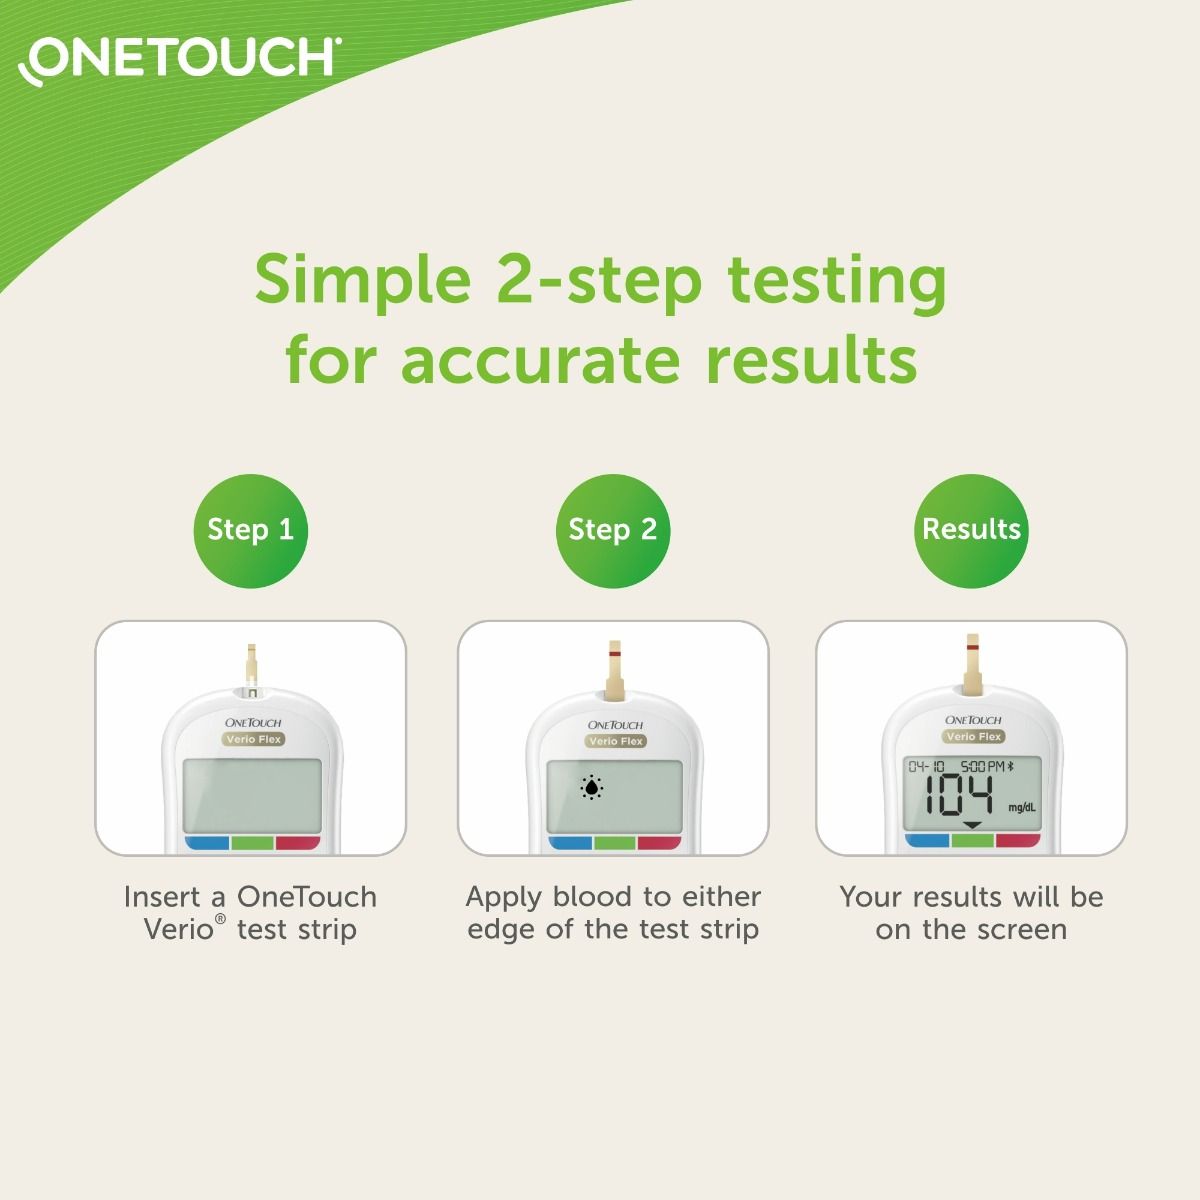 OneTouch Verio Test Strips, 25 Count, Pack of 1 